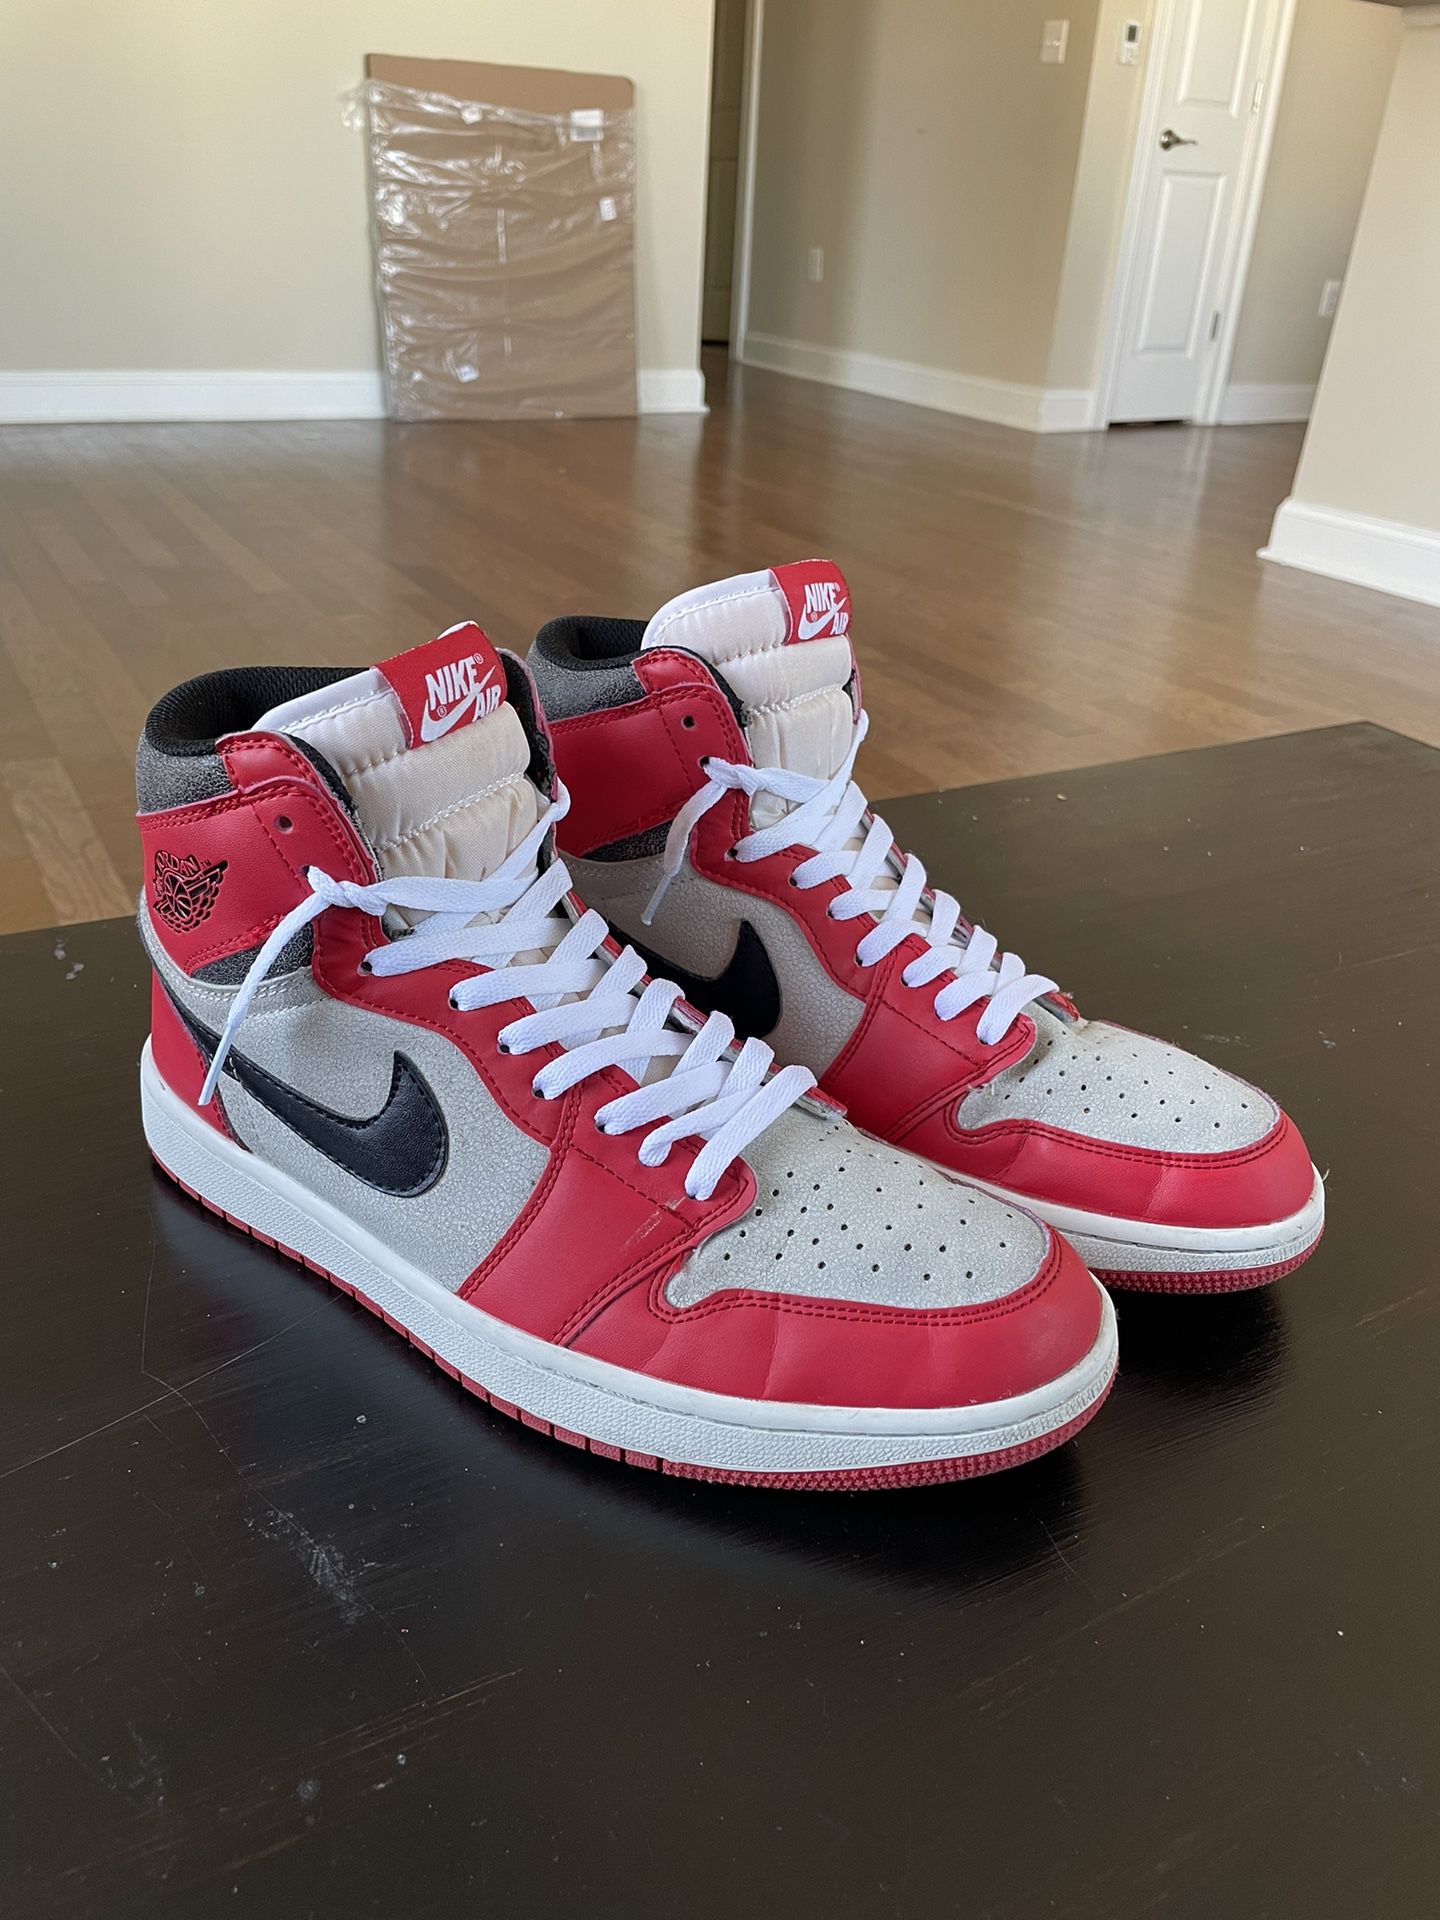 Chicago Lost and Founds Air Jordan 1